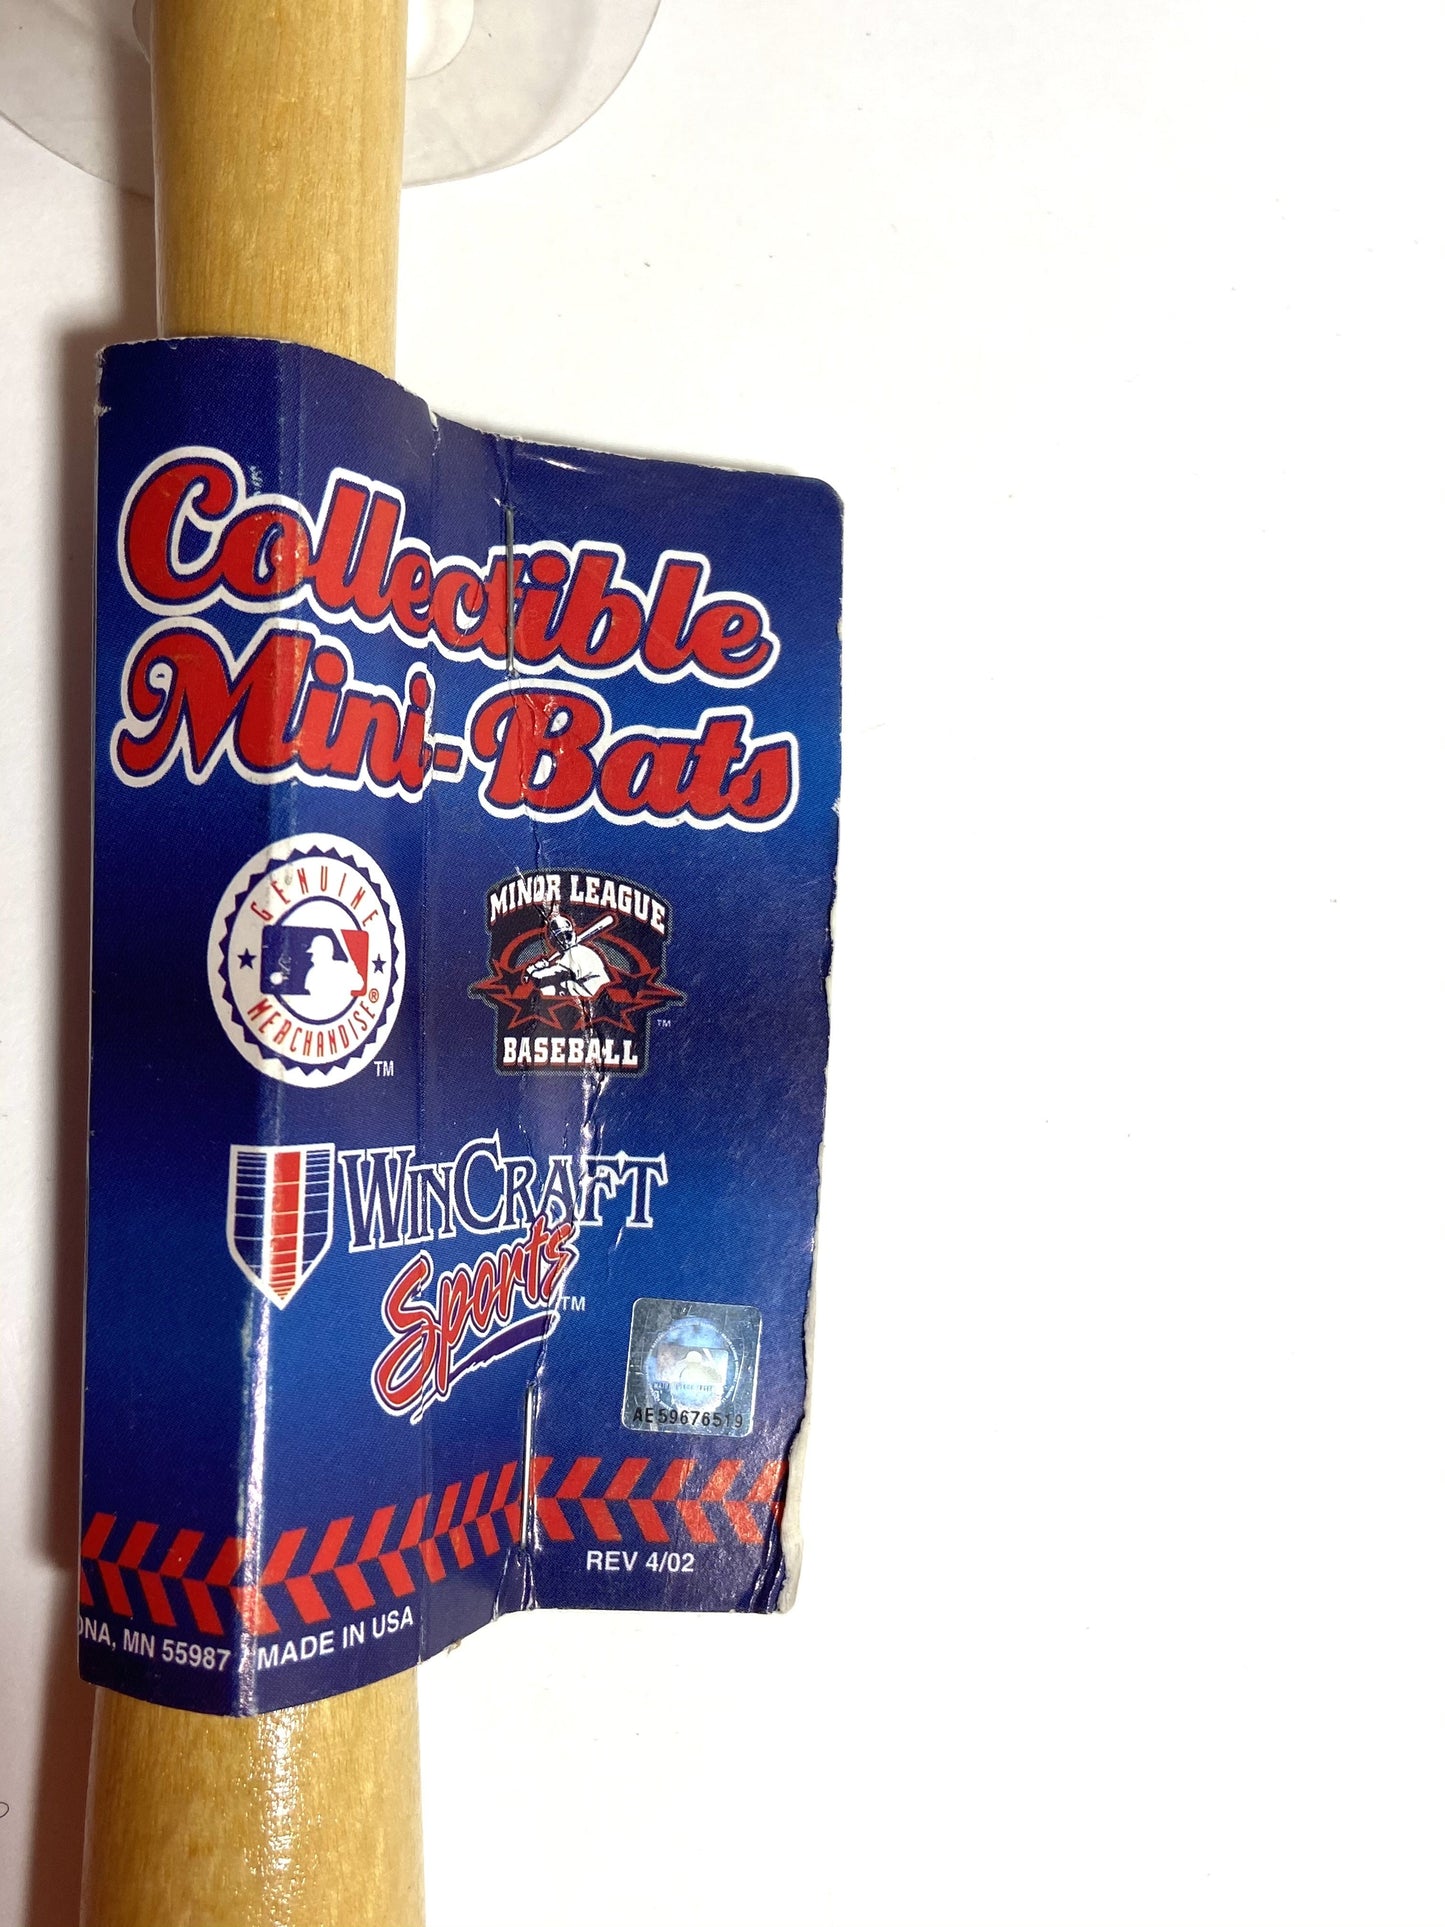 Chicago Cubs Vintage 2004 MLB 22" Wood w/Decal Mini-Bat by Wincraft